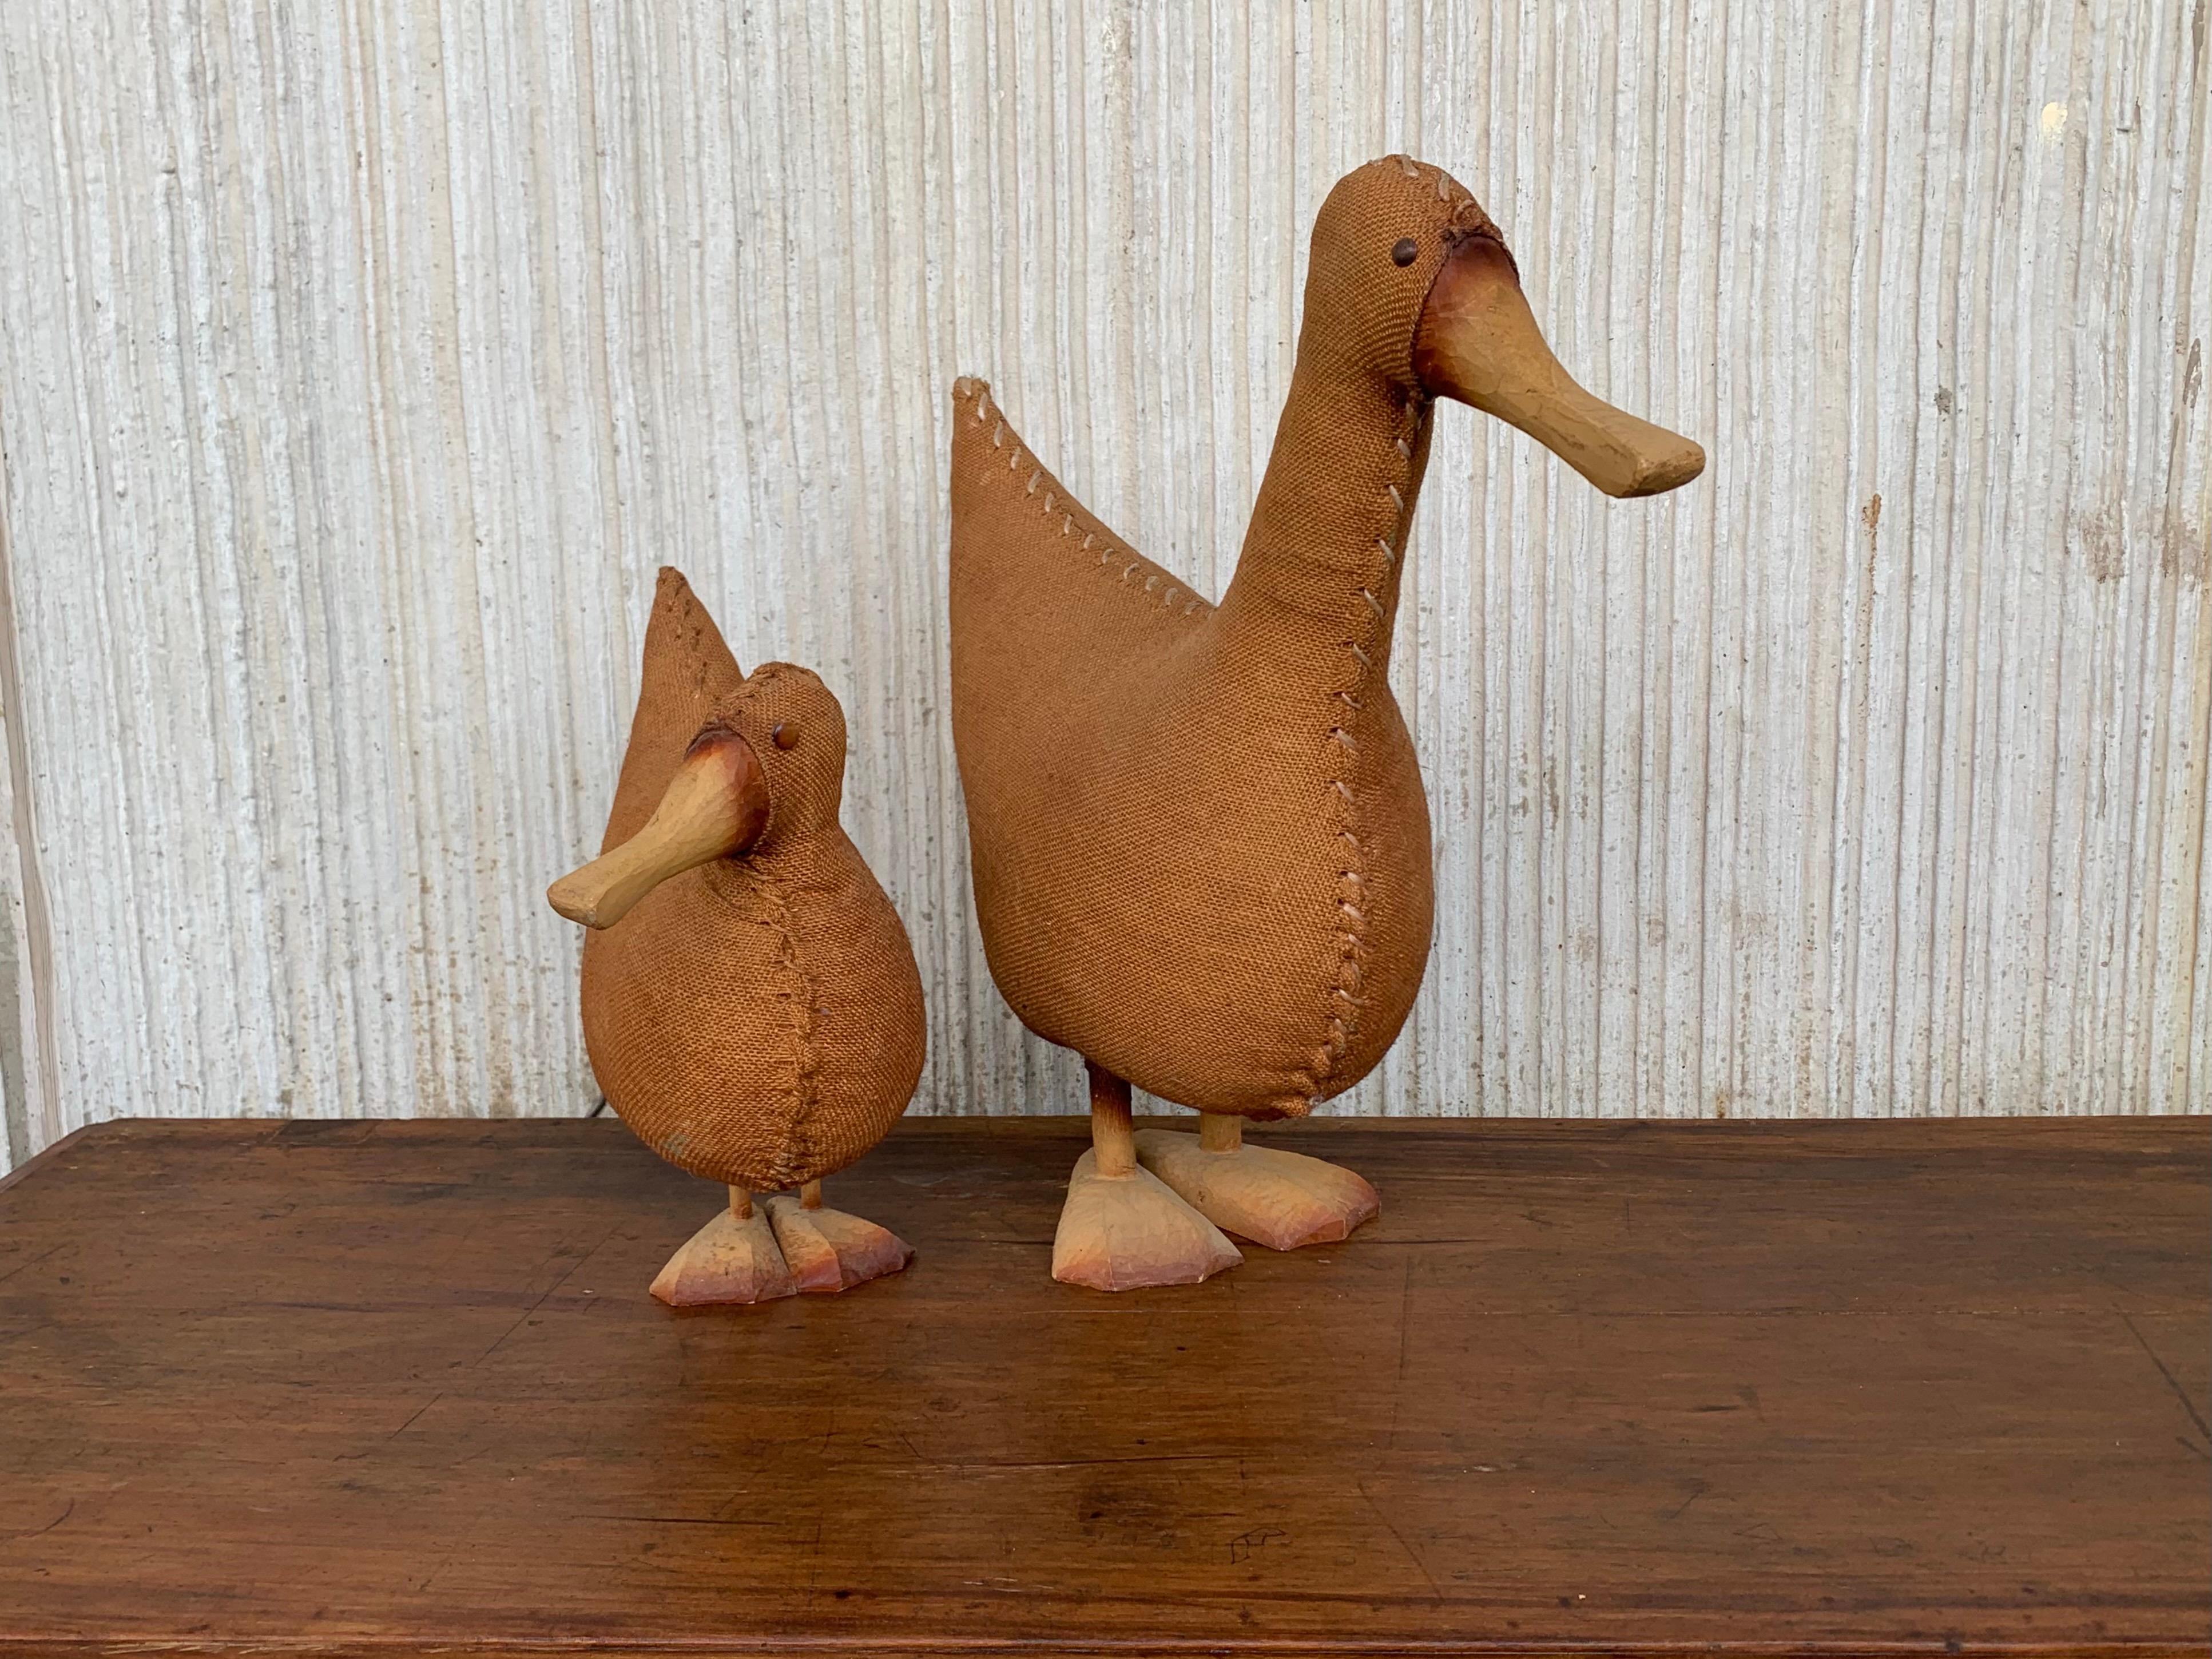 Spanish Midcentury Pair of Wicker Woven Ducks with Wood Details For Sale